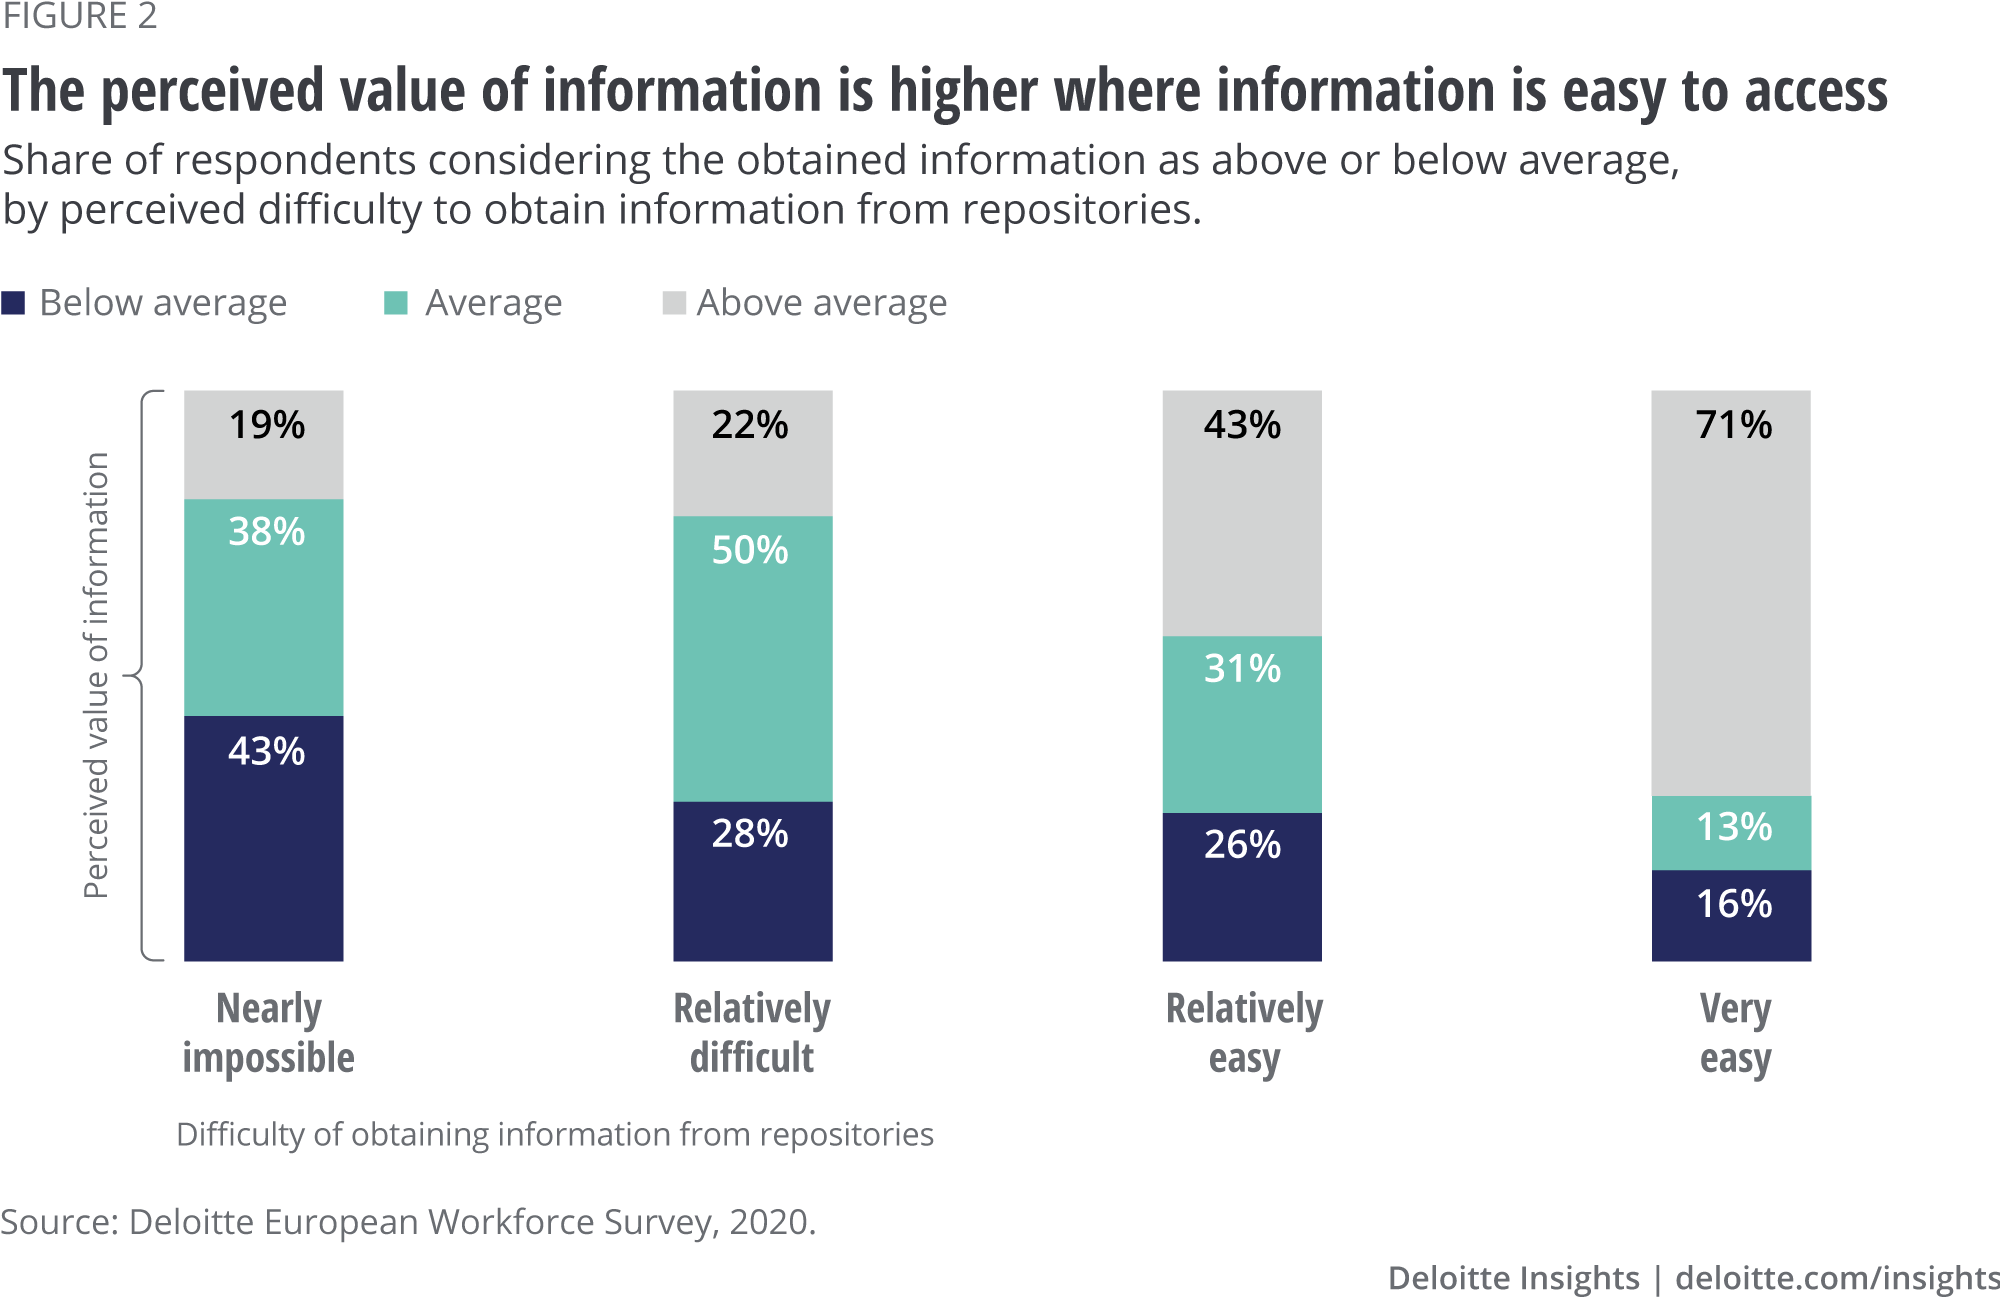 Perceived value of information improves when information is accessible